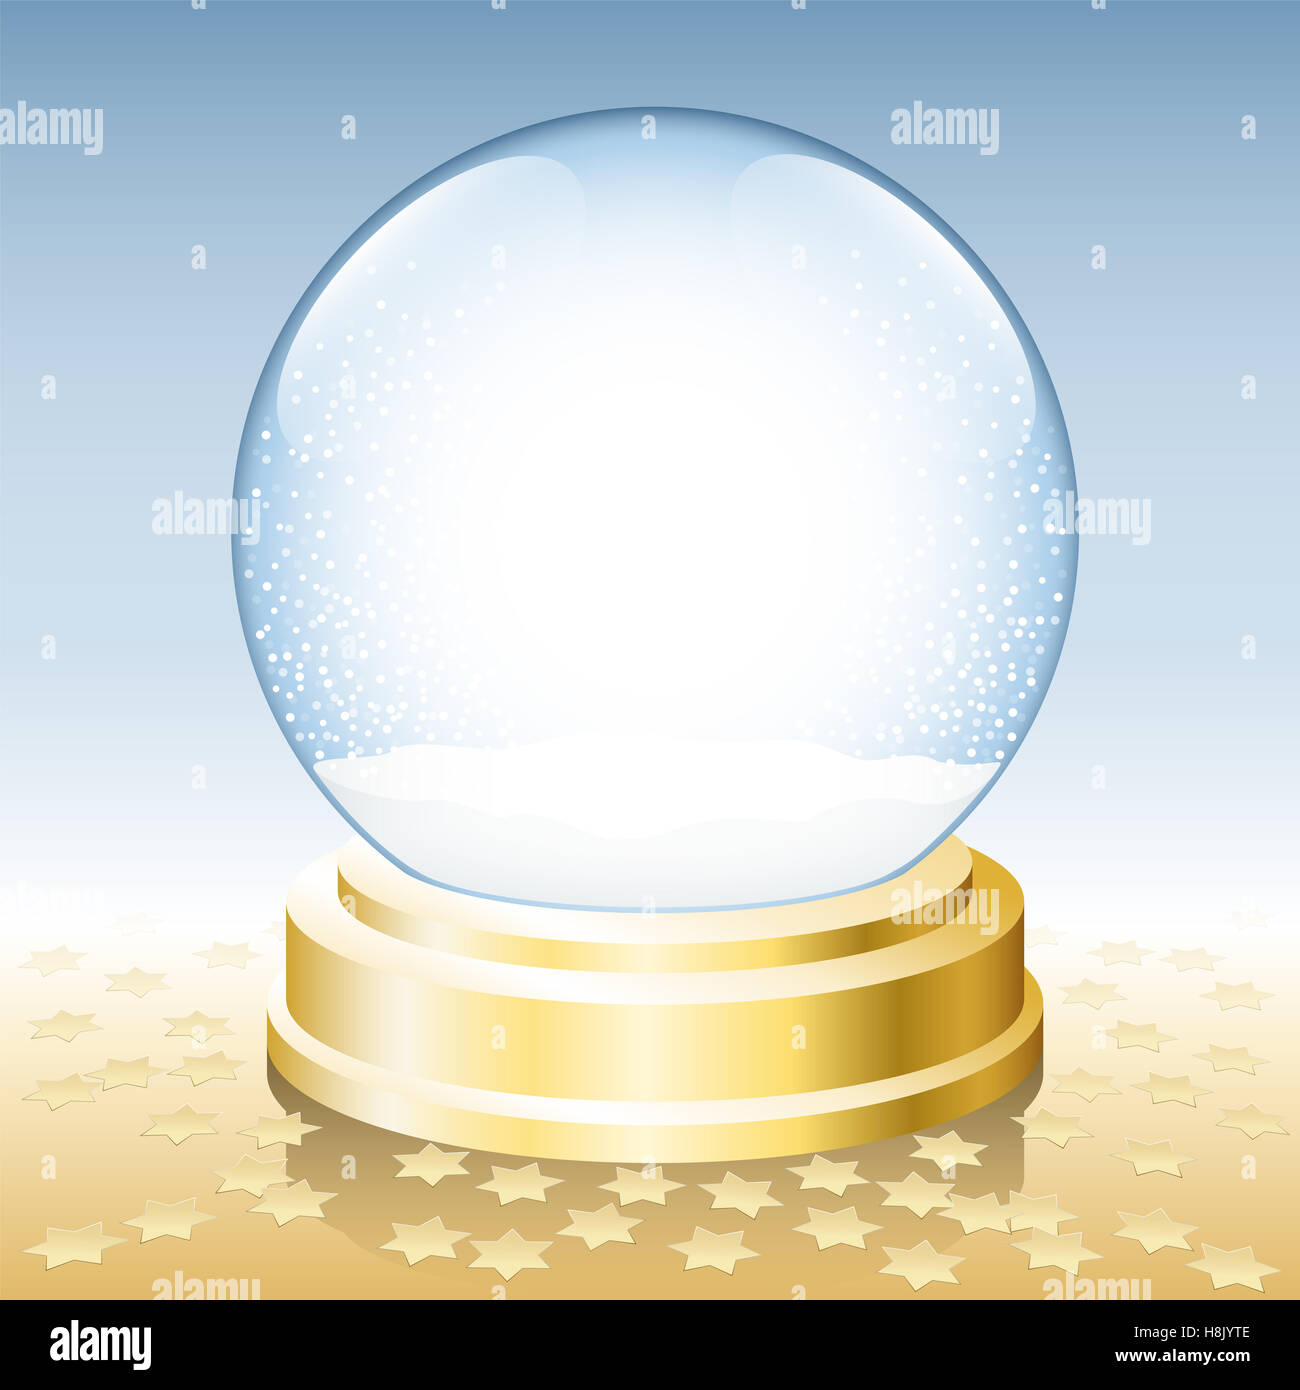 Snow globe on golden base - waiting to be filled and decorated. Stock Photo